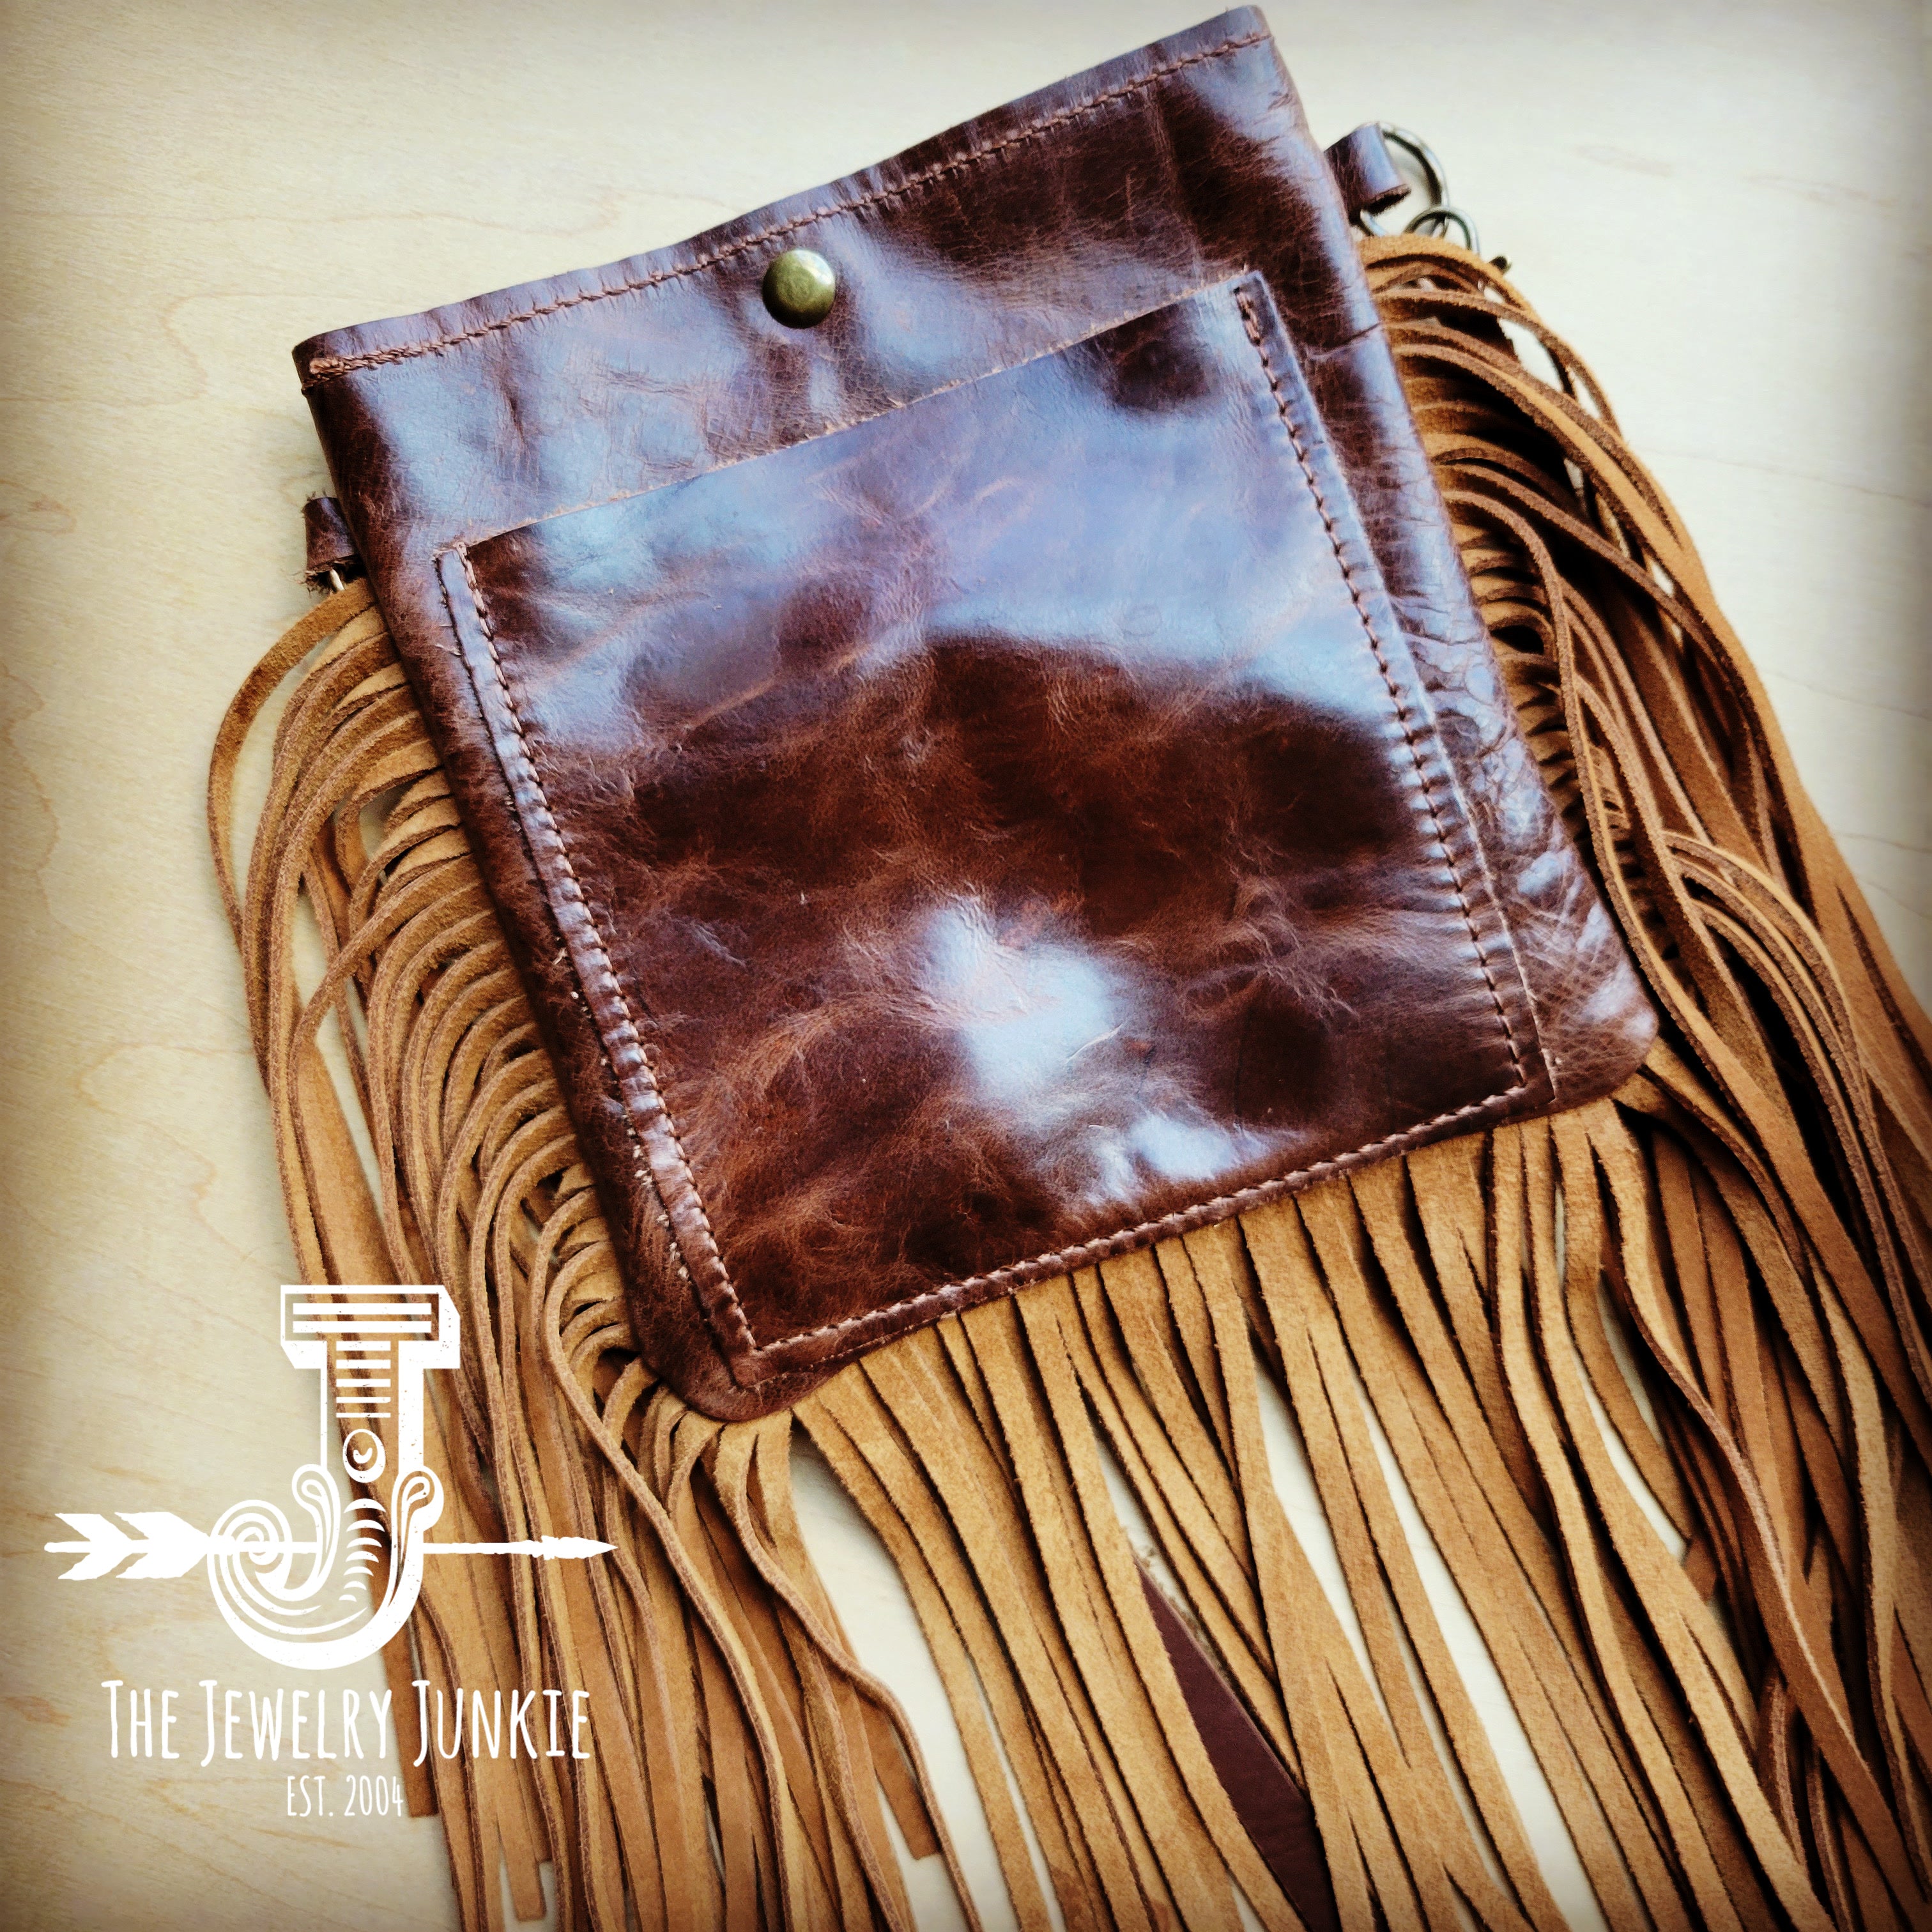 Tooled Brown Leather Cross Body Fringe Purse